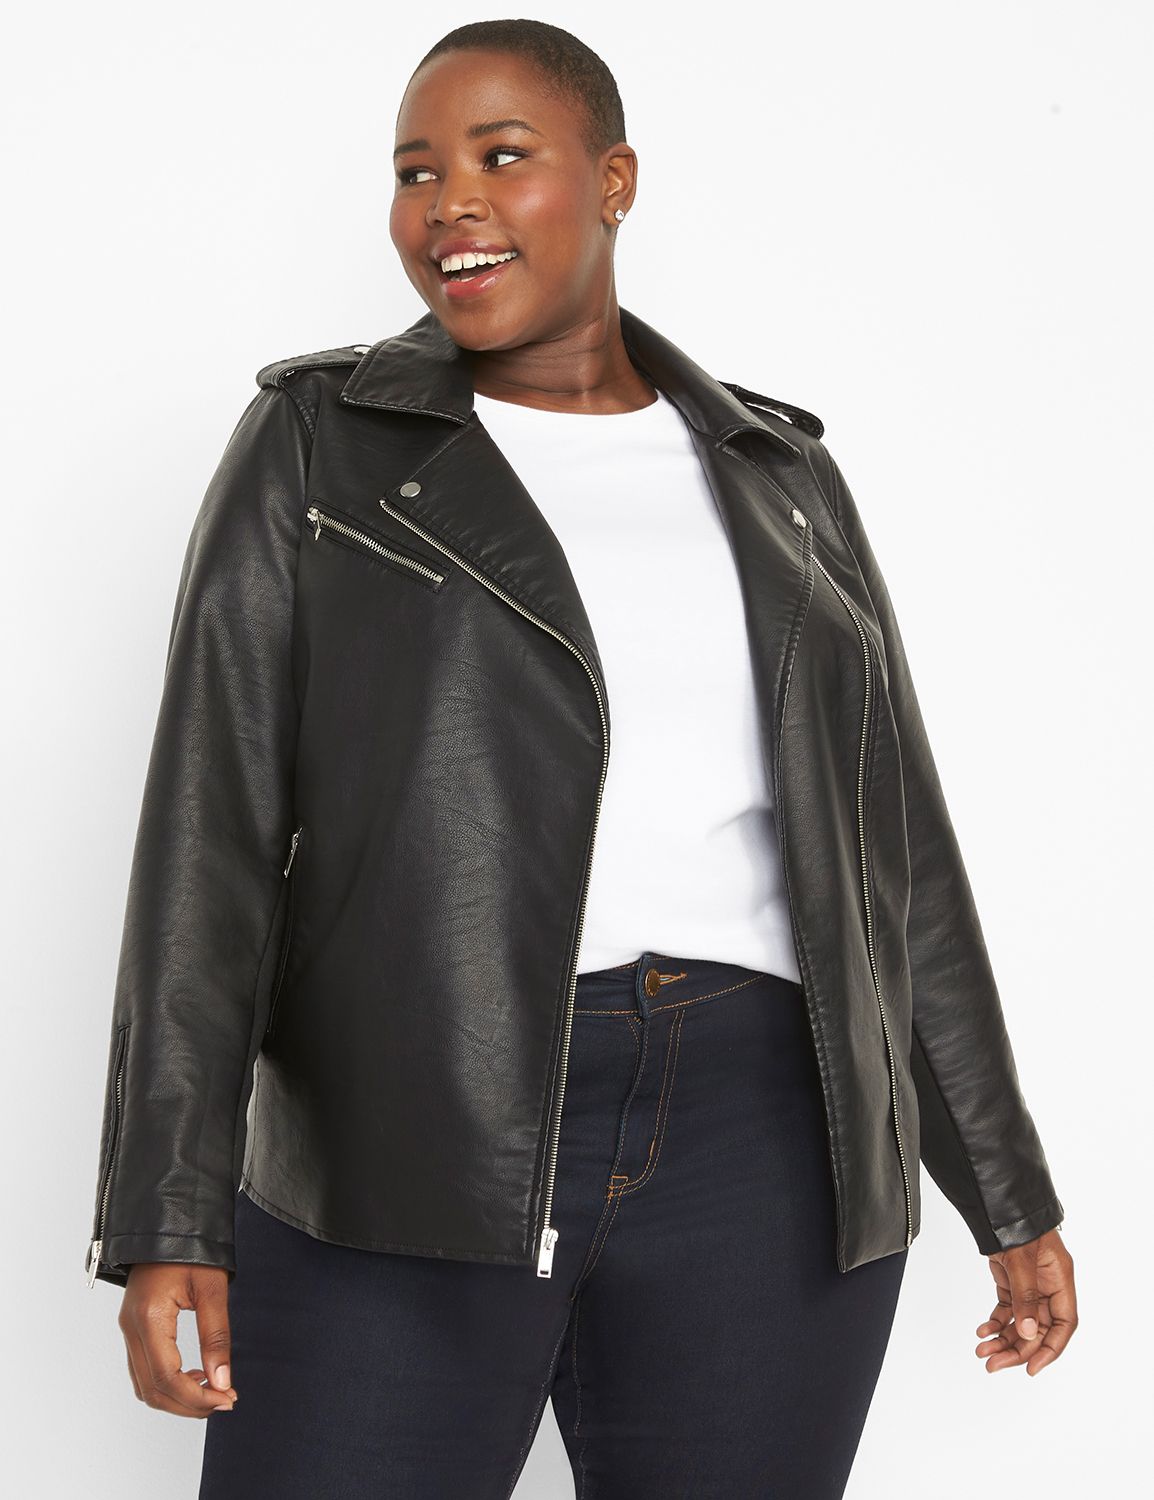 SPANX, Jackets & Coats, Spanx Drape Front Jacket With Faux Leather  Detailing